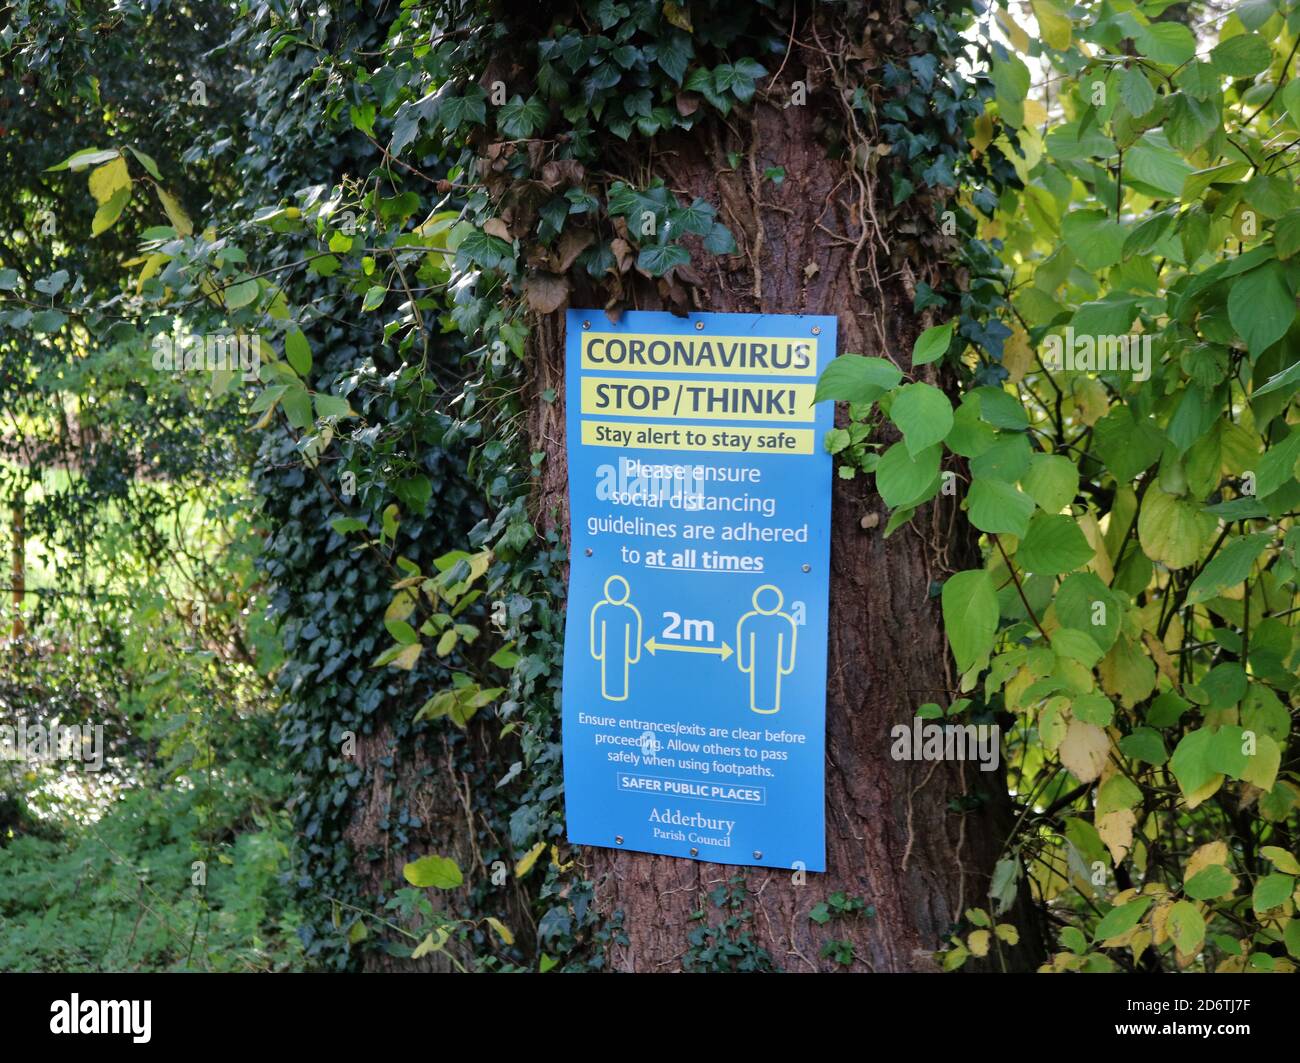 Coronavirus Stop / Think! Stay alert to stay safe - sign on tree in forest. Stock Photo